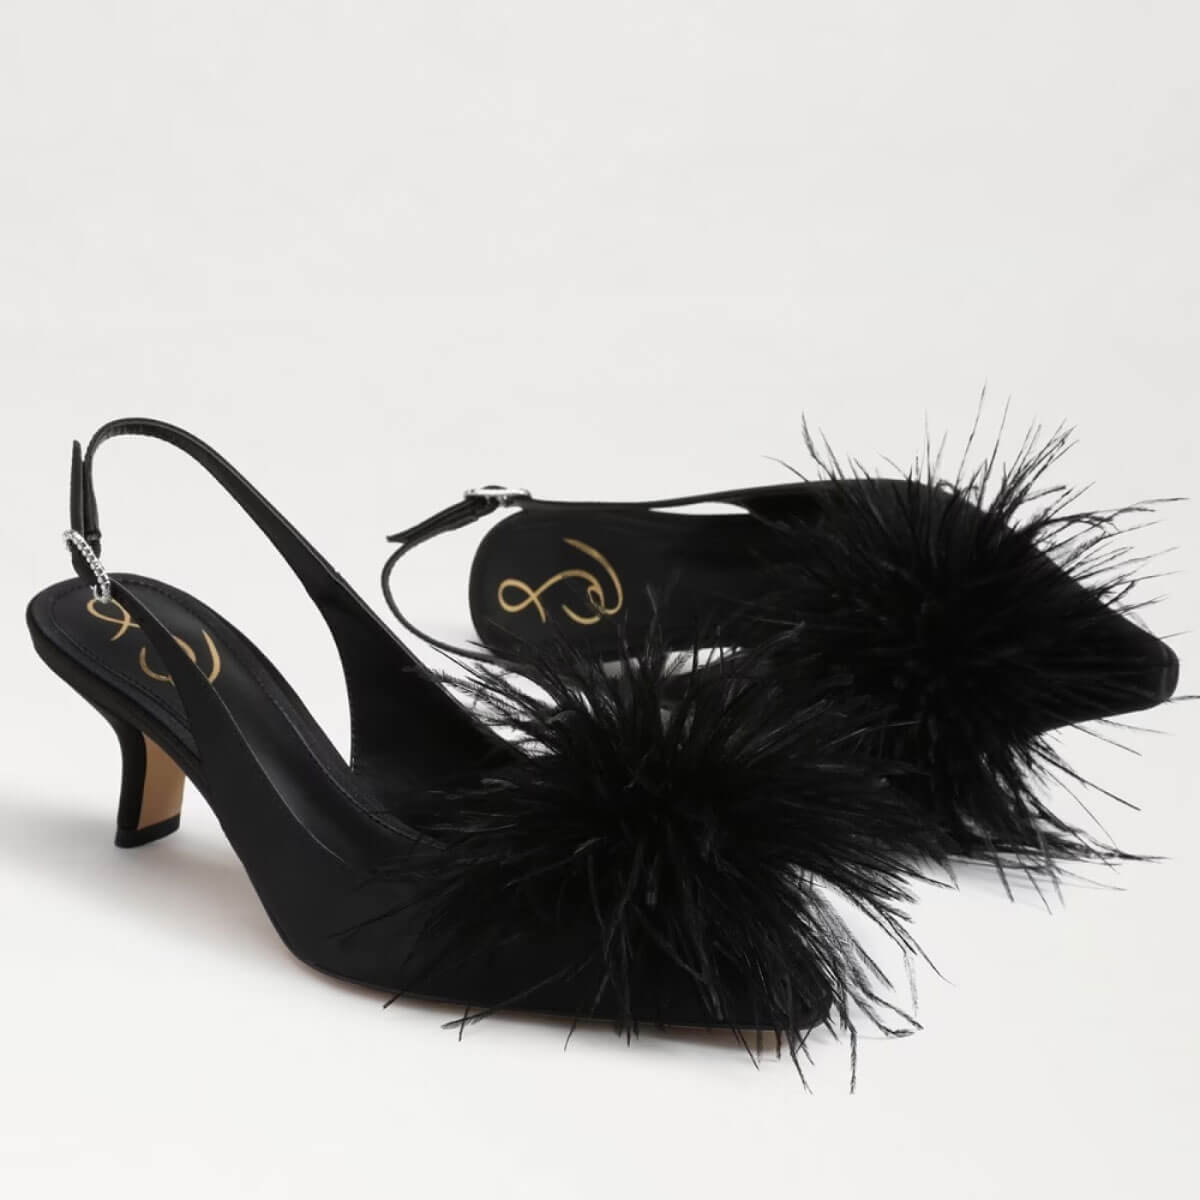 Sam Edelman Bianka Feather Slingback Pump black | MILK MONEY milkmoney.co | cute shoes for women. ladies shoes. nice shoes for women. footwear for women. ladies shoes online. ladies footwear. womens shoes and boots. pretty shoes for women. beautiful shoes for women.